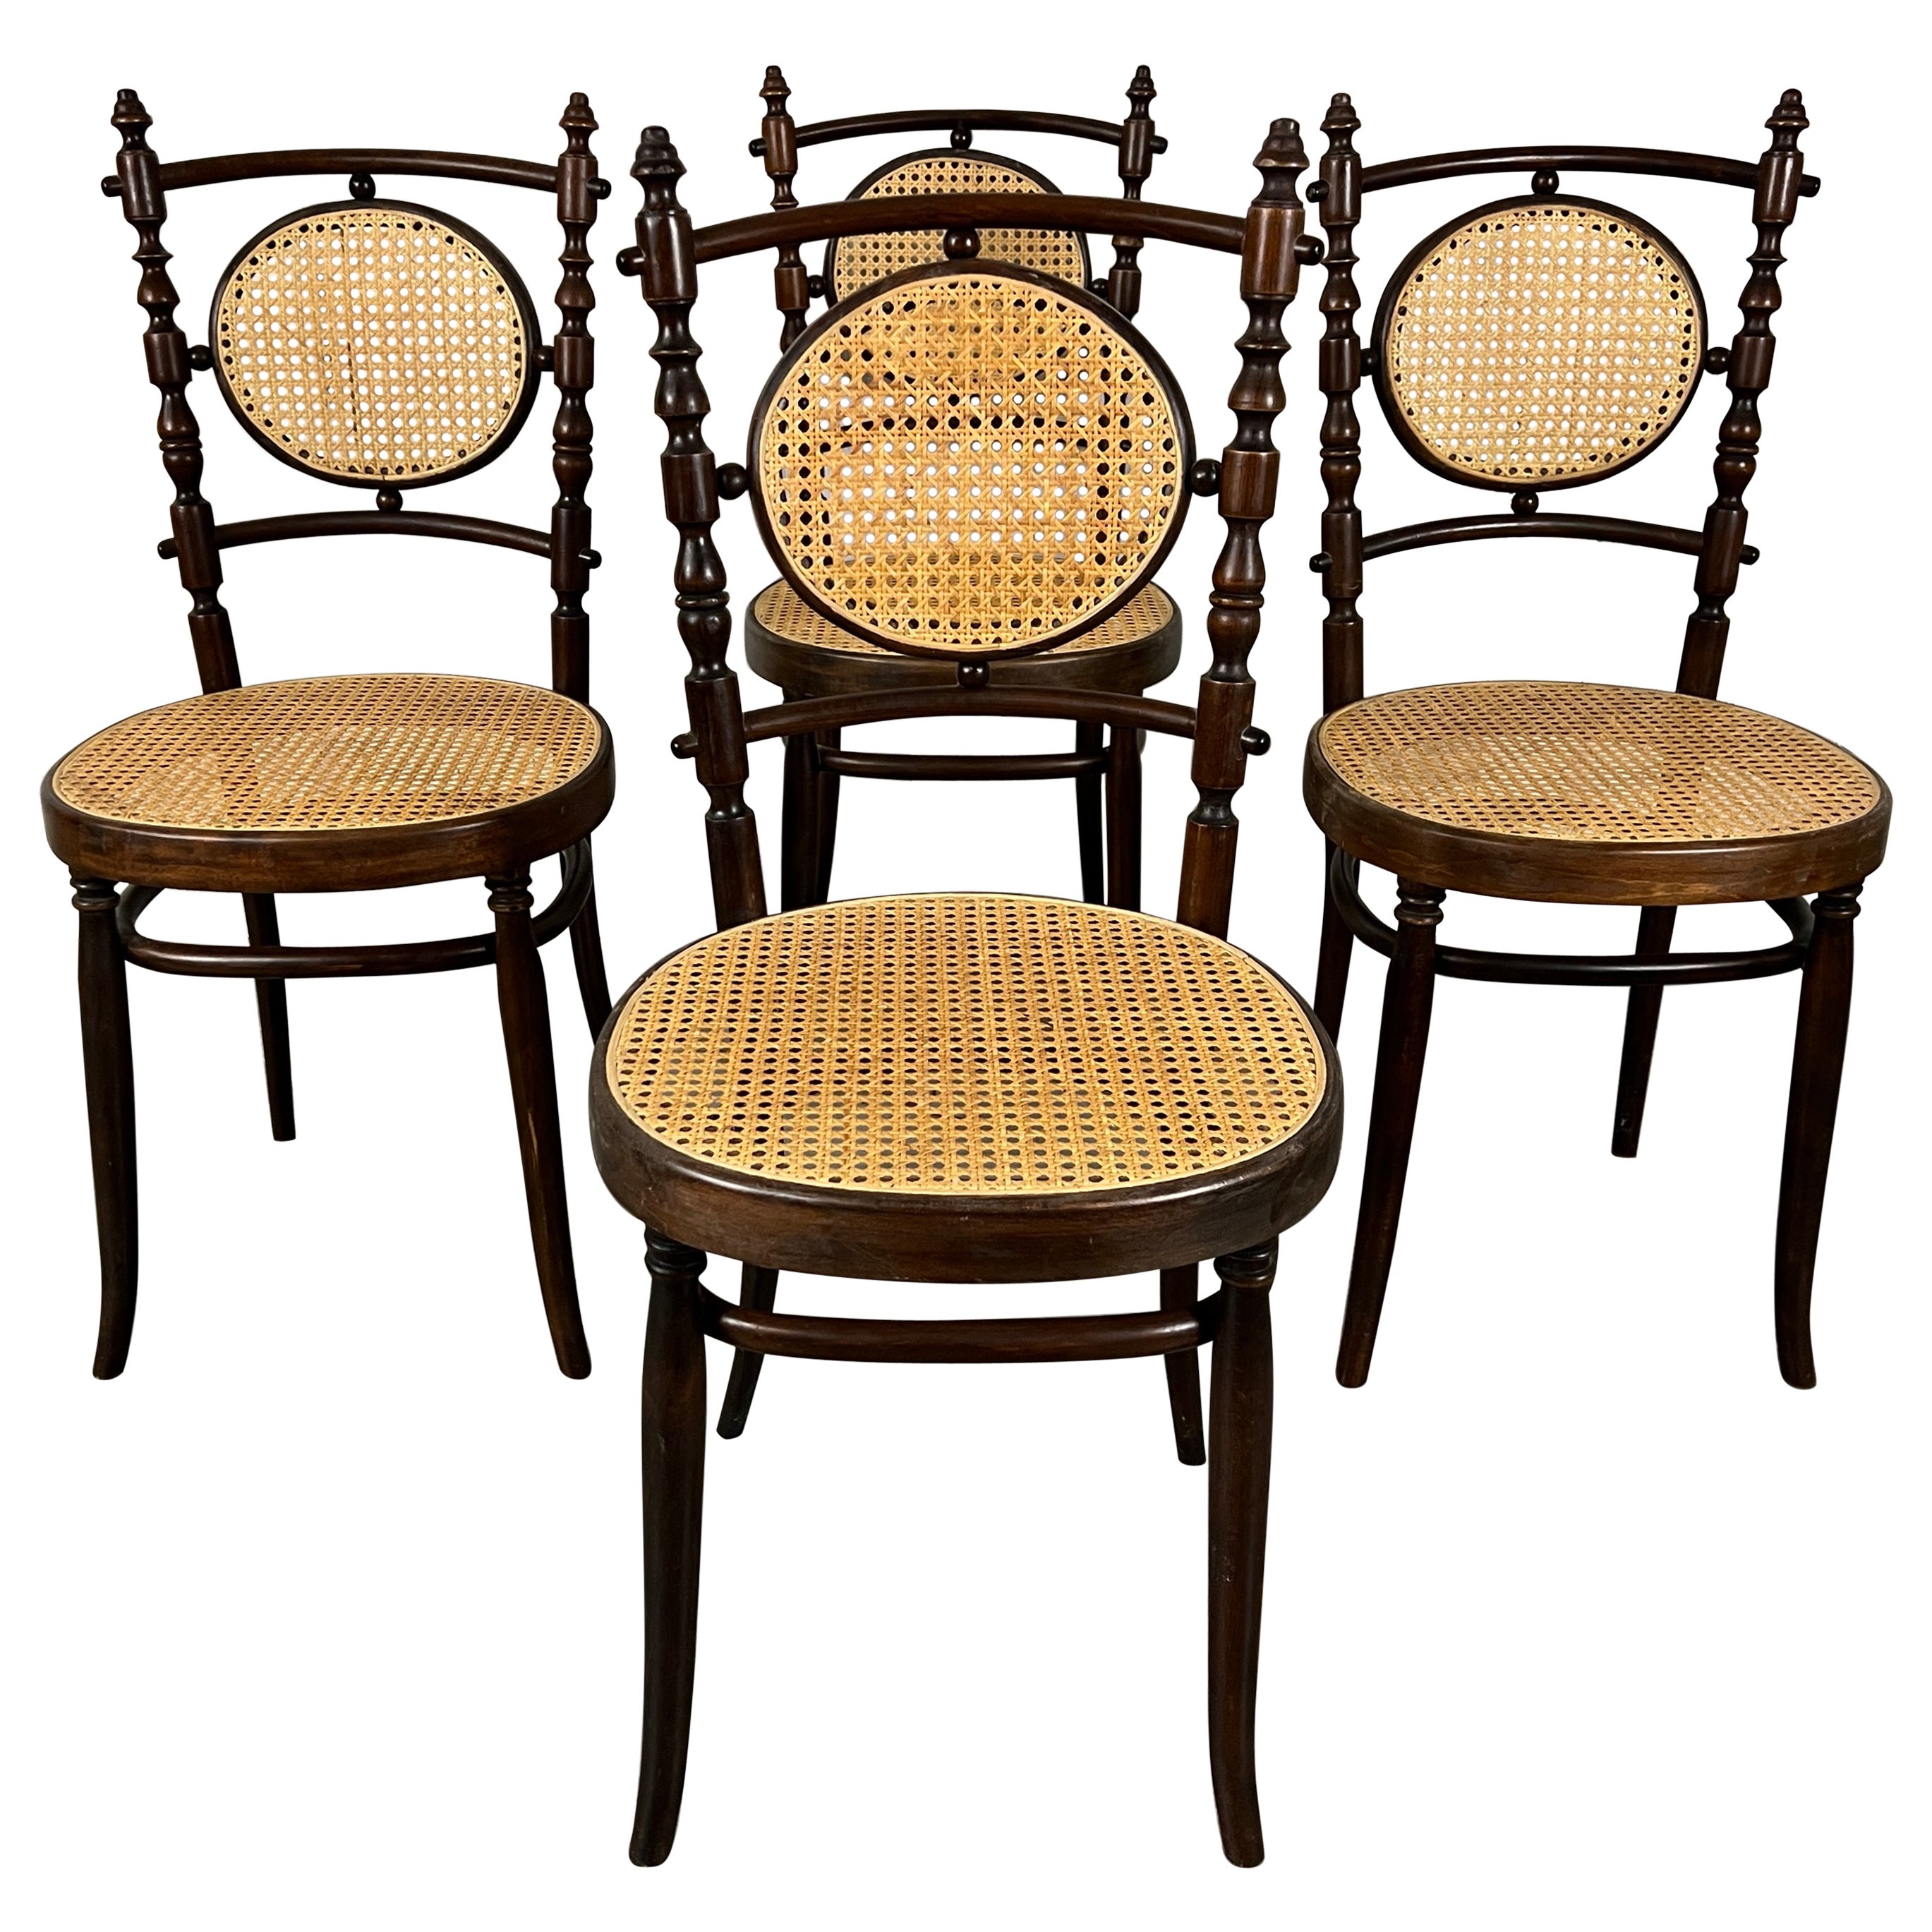 Salvatore Leone Bentwood Dining Chairs